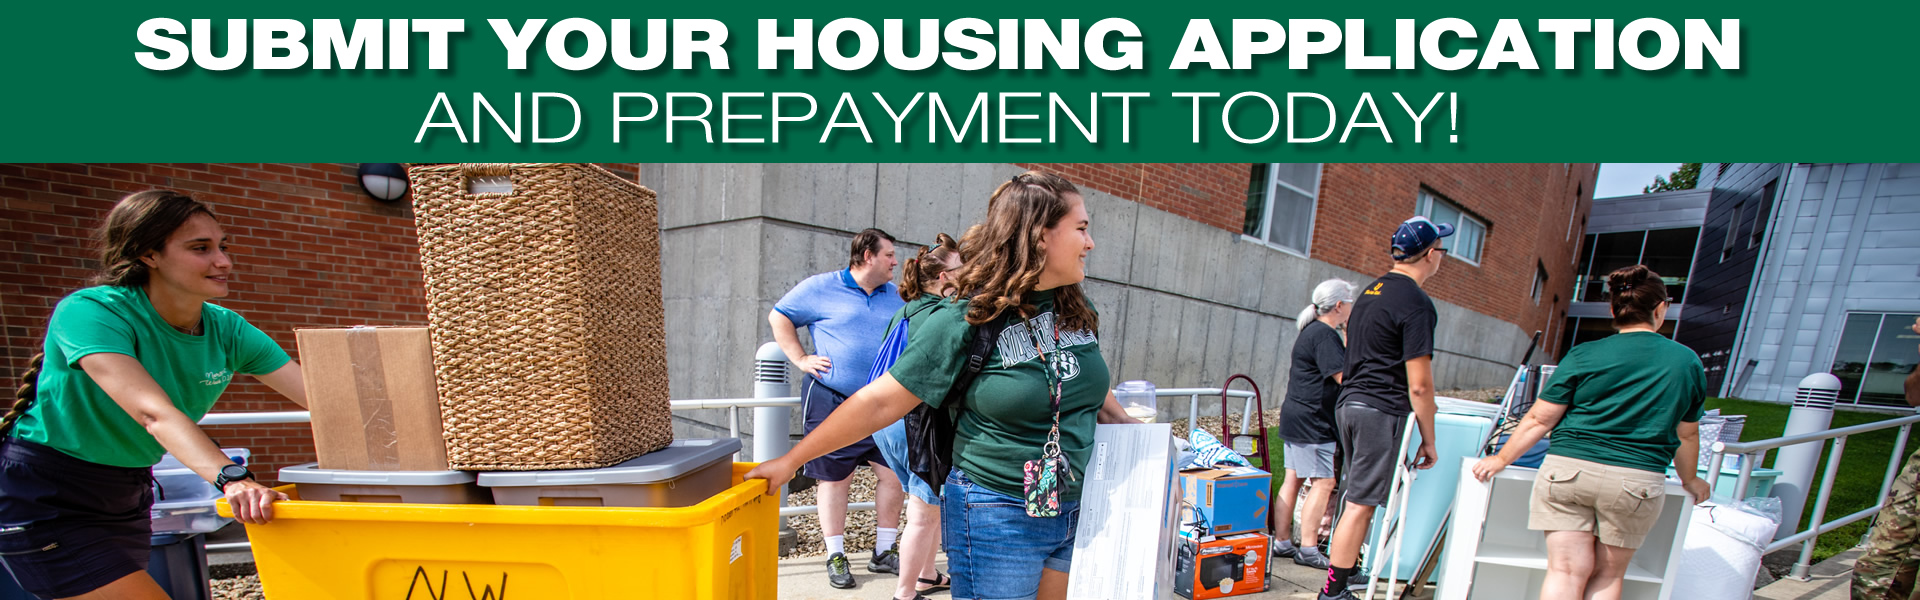 Submit your housing application and prepayment today!